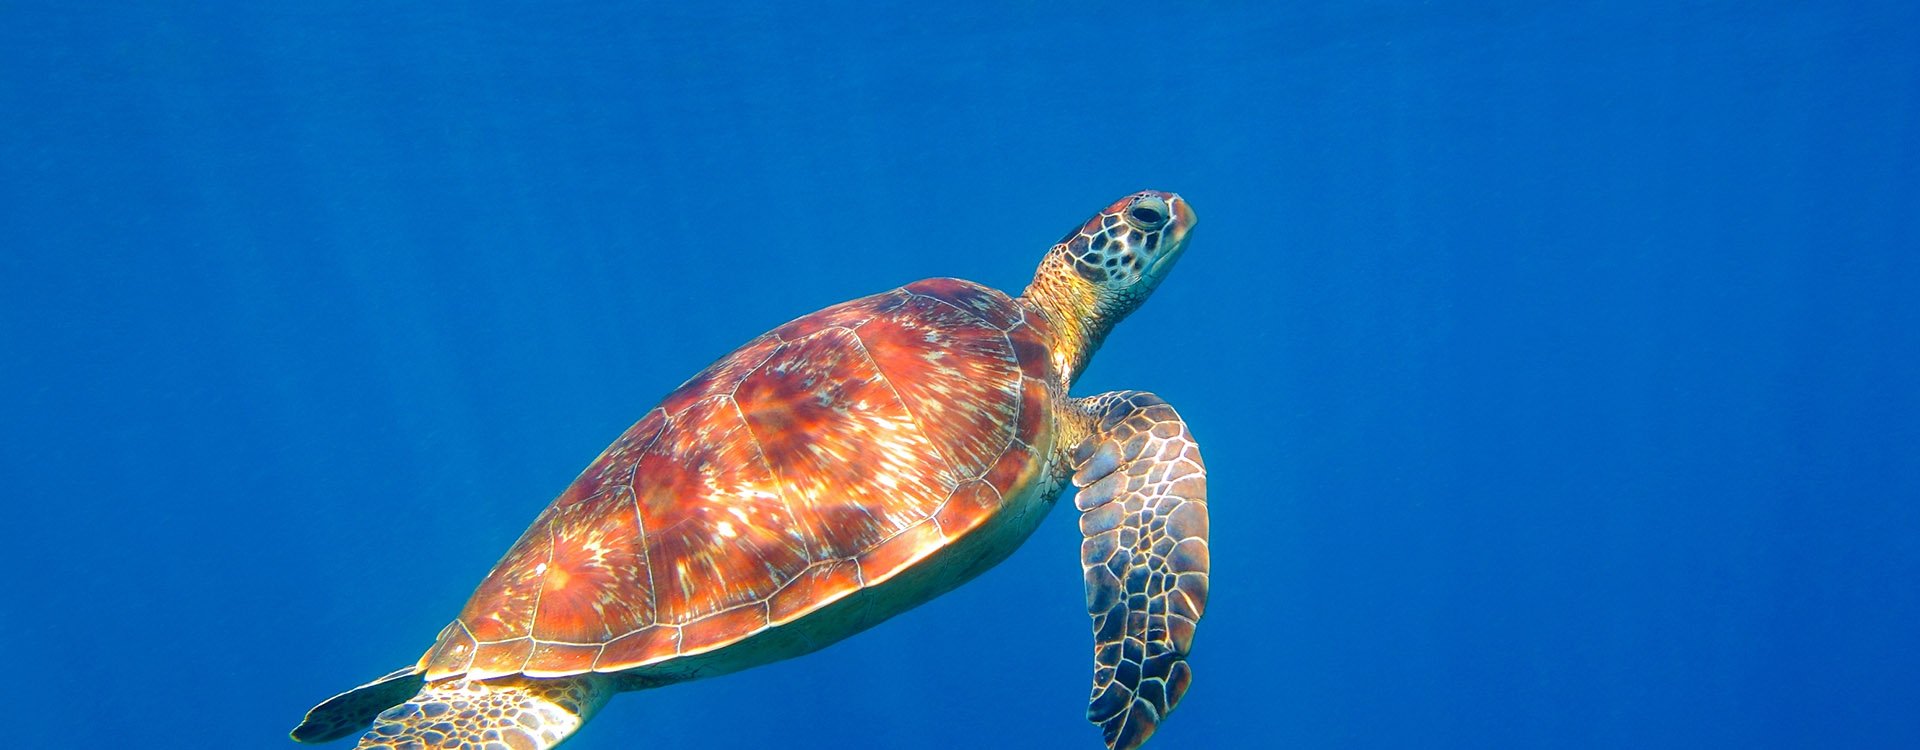 Sea turtle and sun in the blue ocean. Swimming aquatic animal. Scuba diving with the turtles